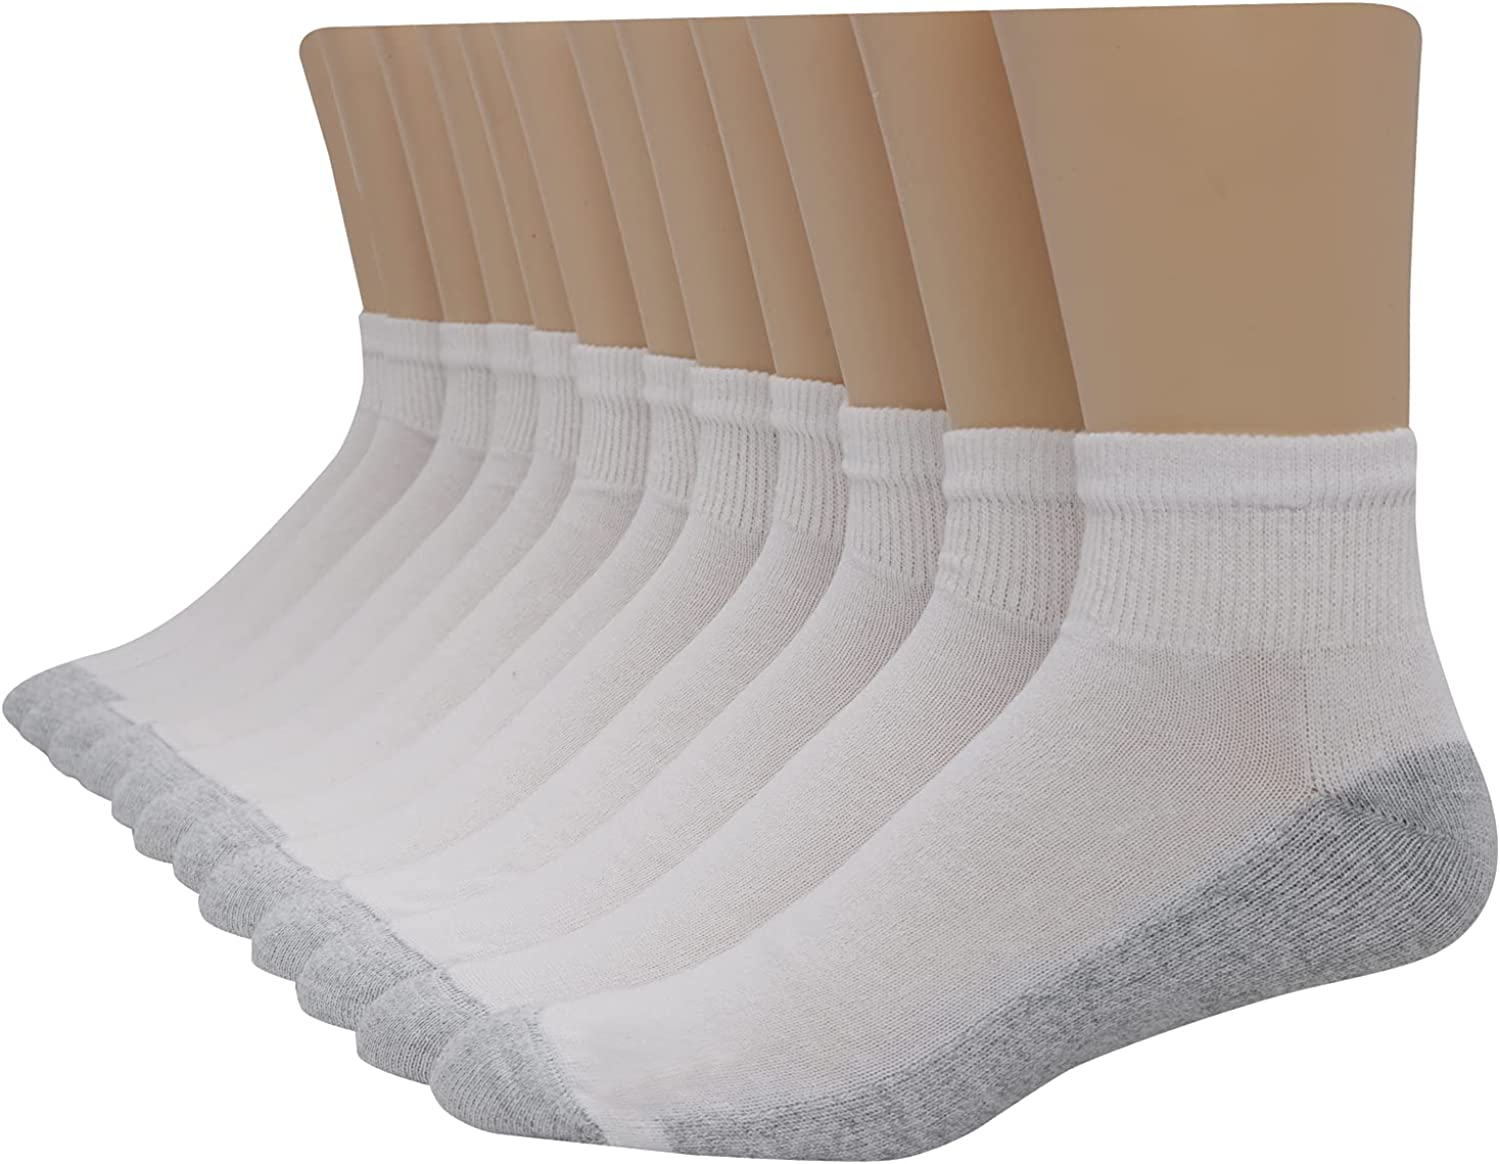 Hanes Men's FreshIQ Odor Protection With Cushioned Foot Bottom Ankle Socks, 12-Pack $9.60